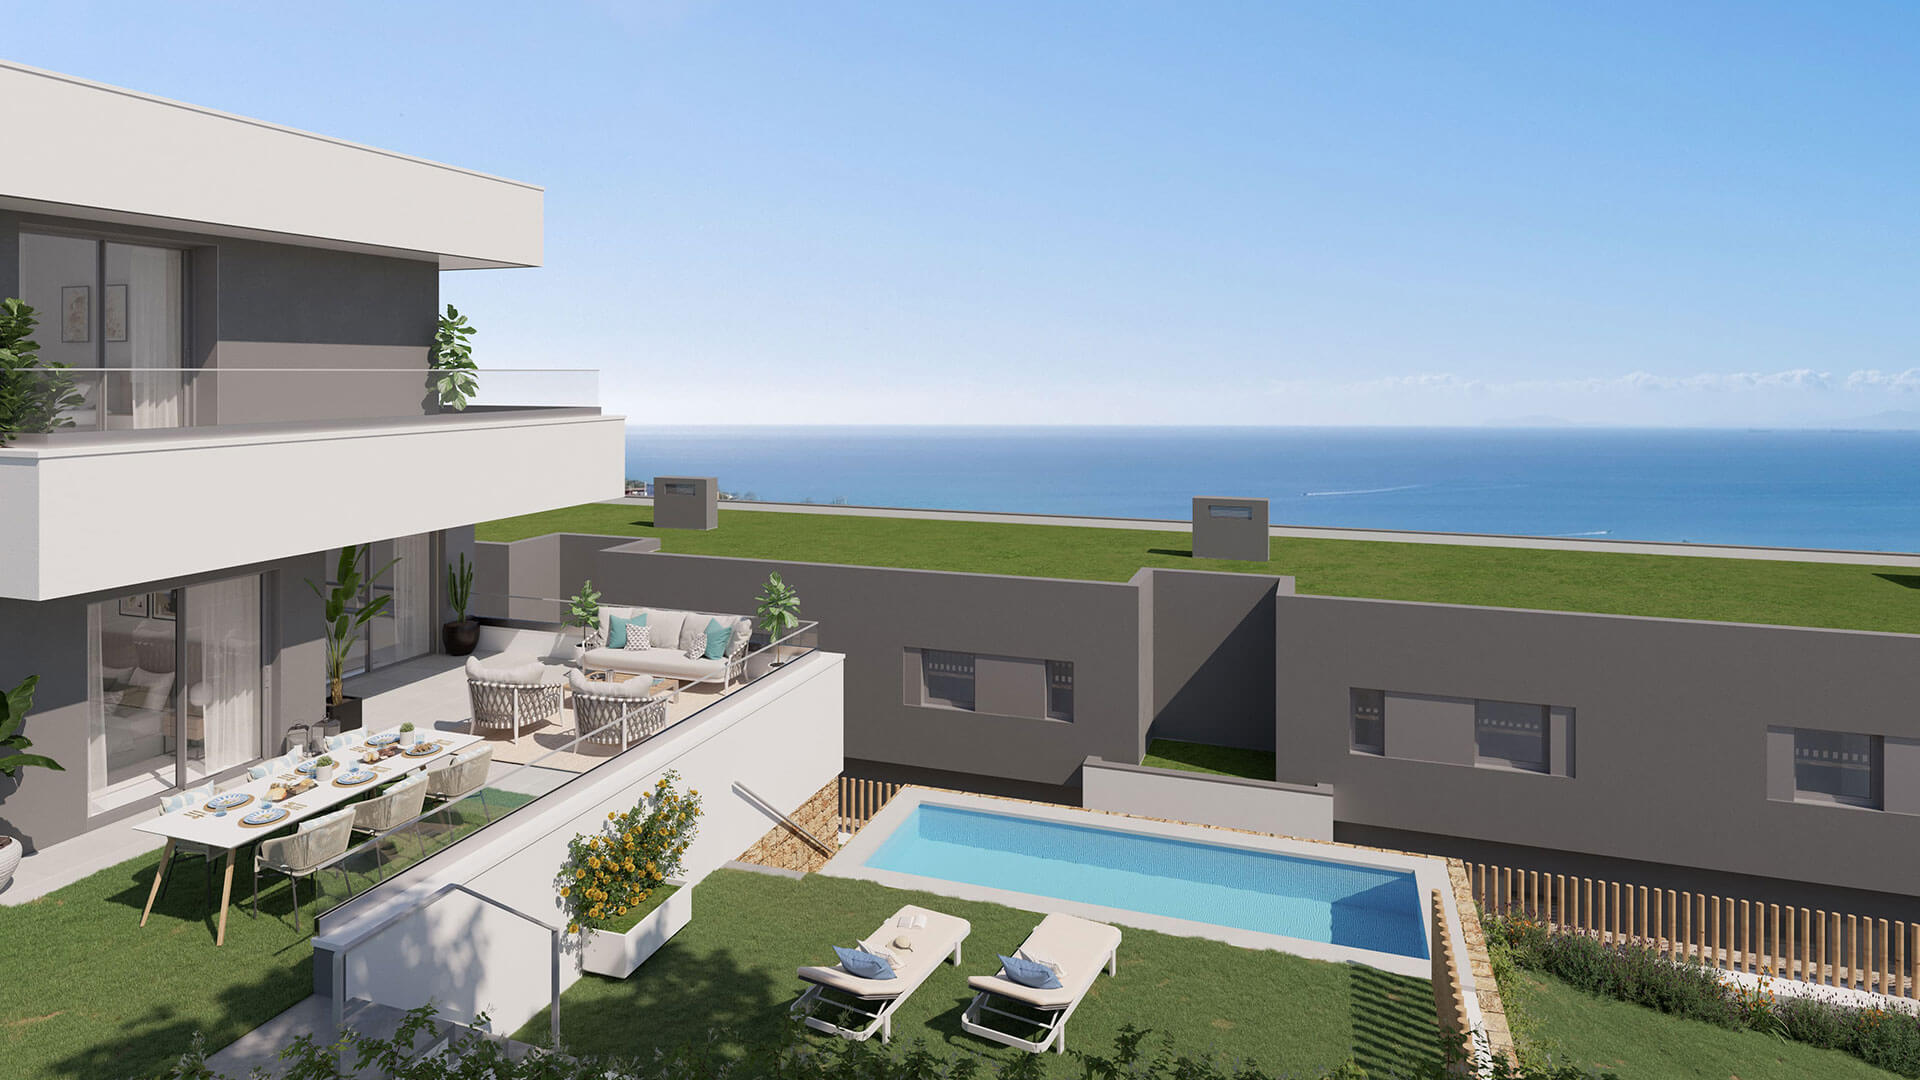 Blue Marine - New Homes For Sale in Manilva